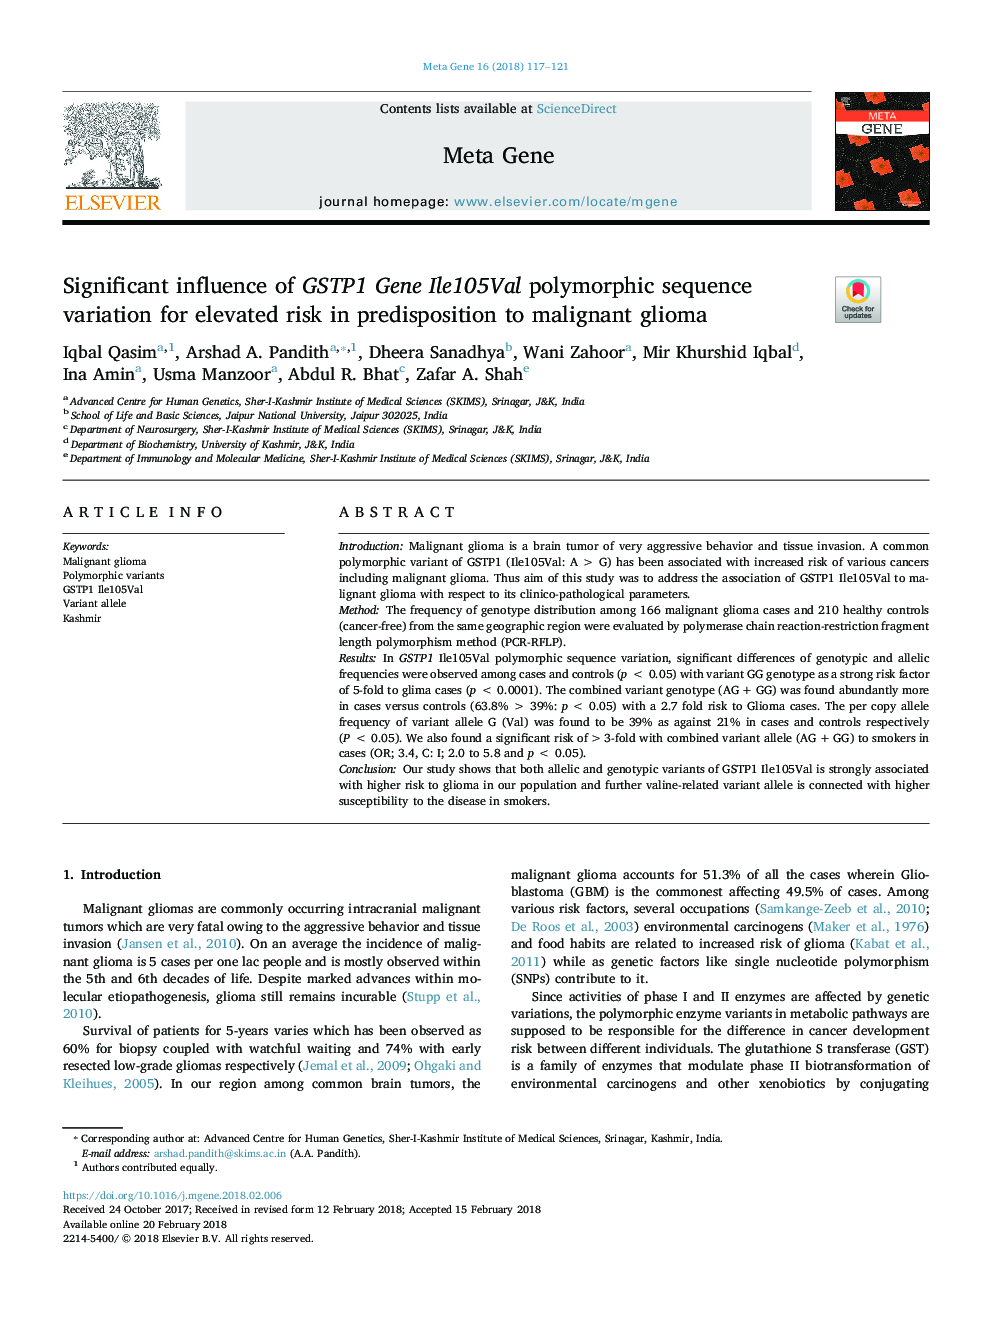 Significant influence of GSTP1 Gene Ile105Val polymorphic sequence variation for elevated risk in predisposition to malignant glioma